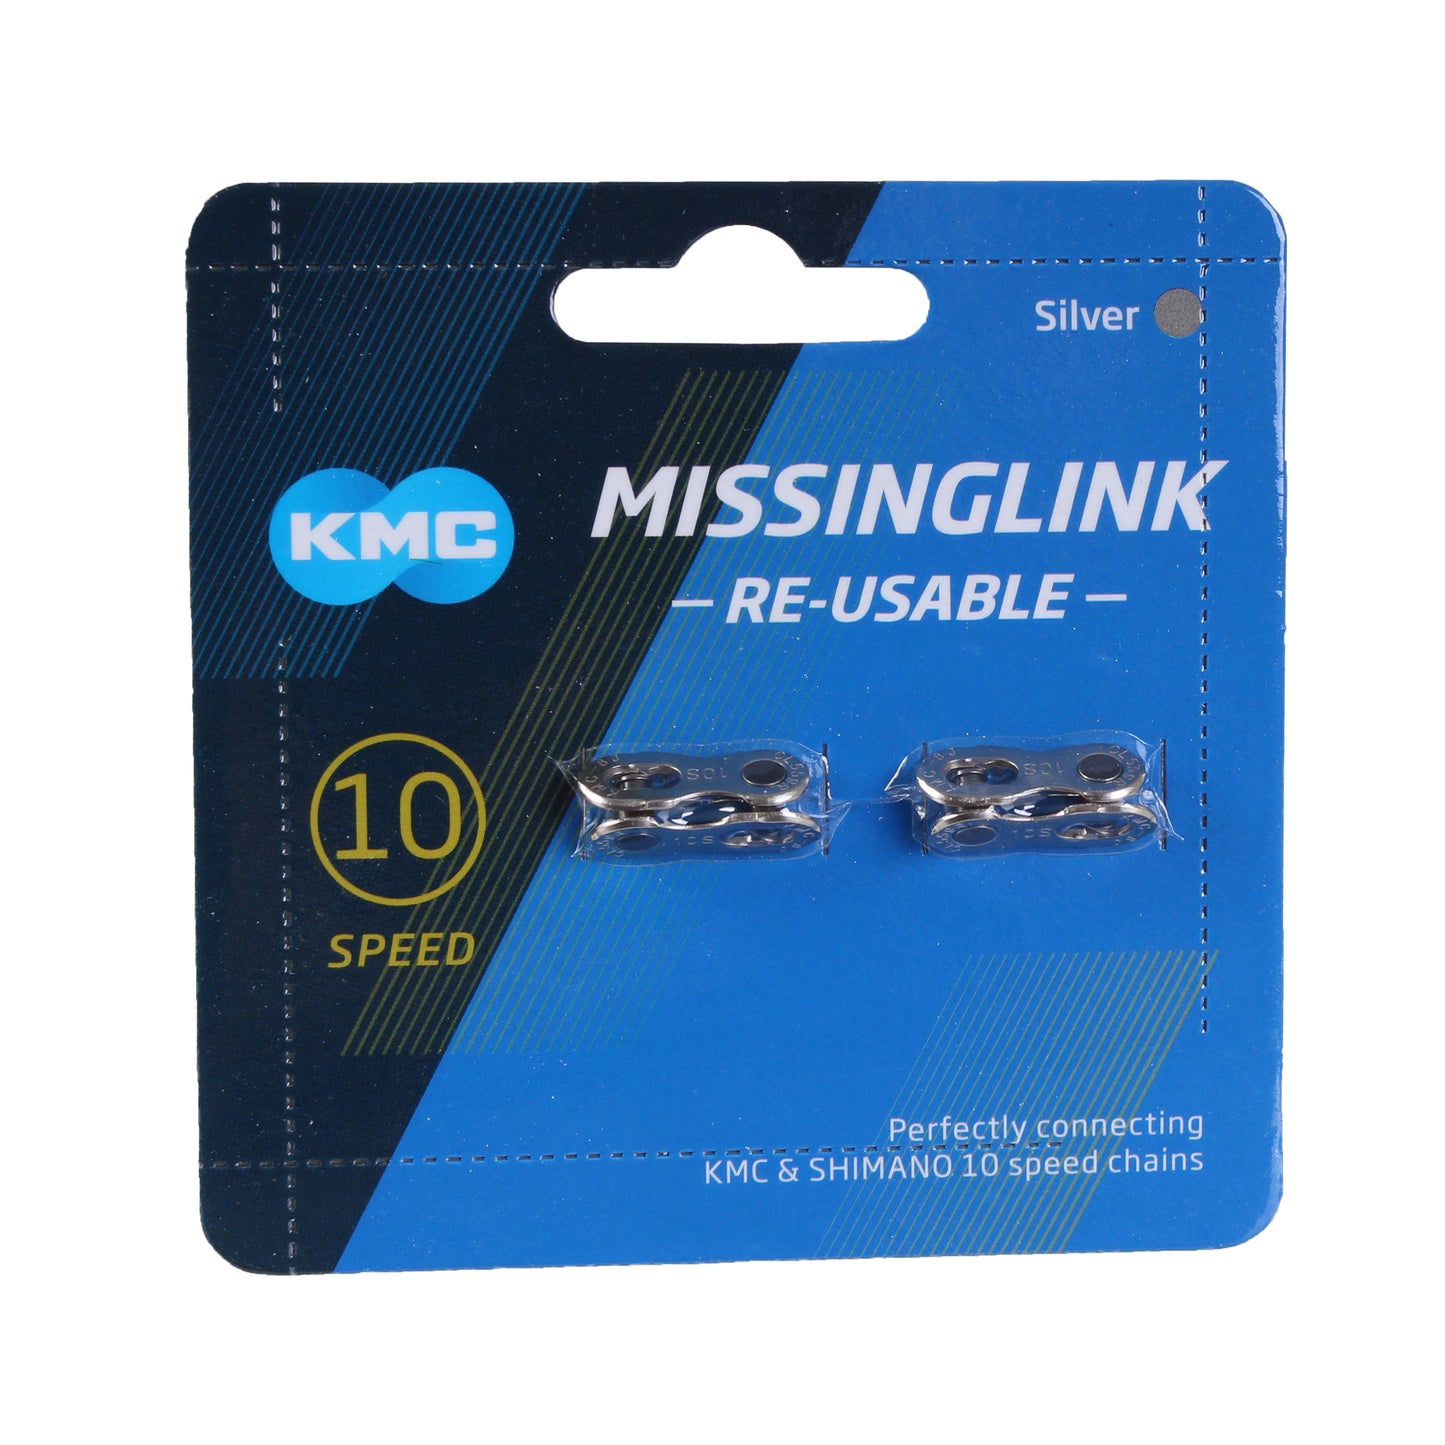 KMC Missing Link 10R - 10 Speed Link Silver Card of 6 